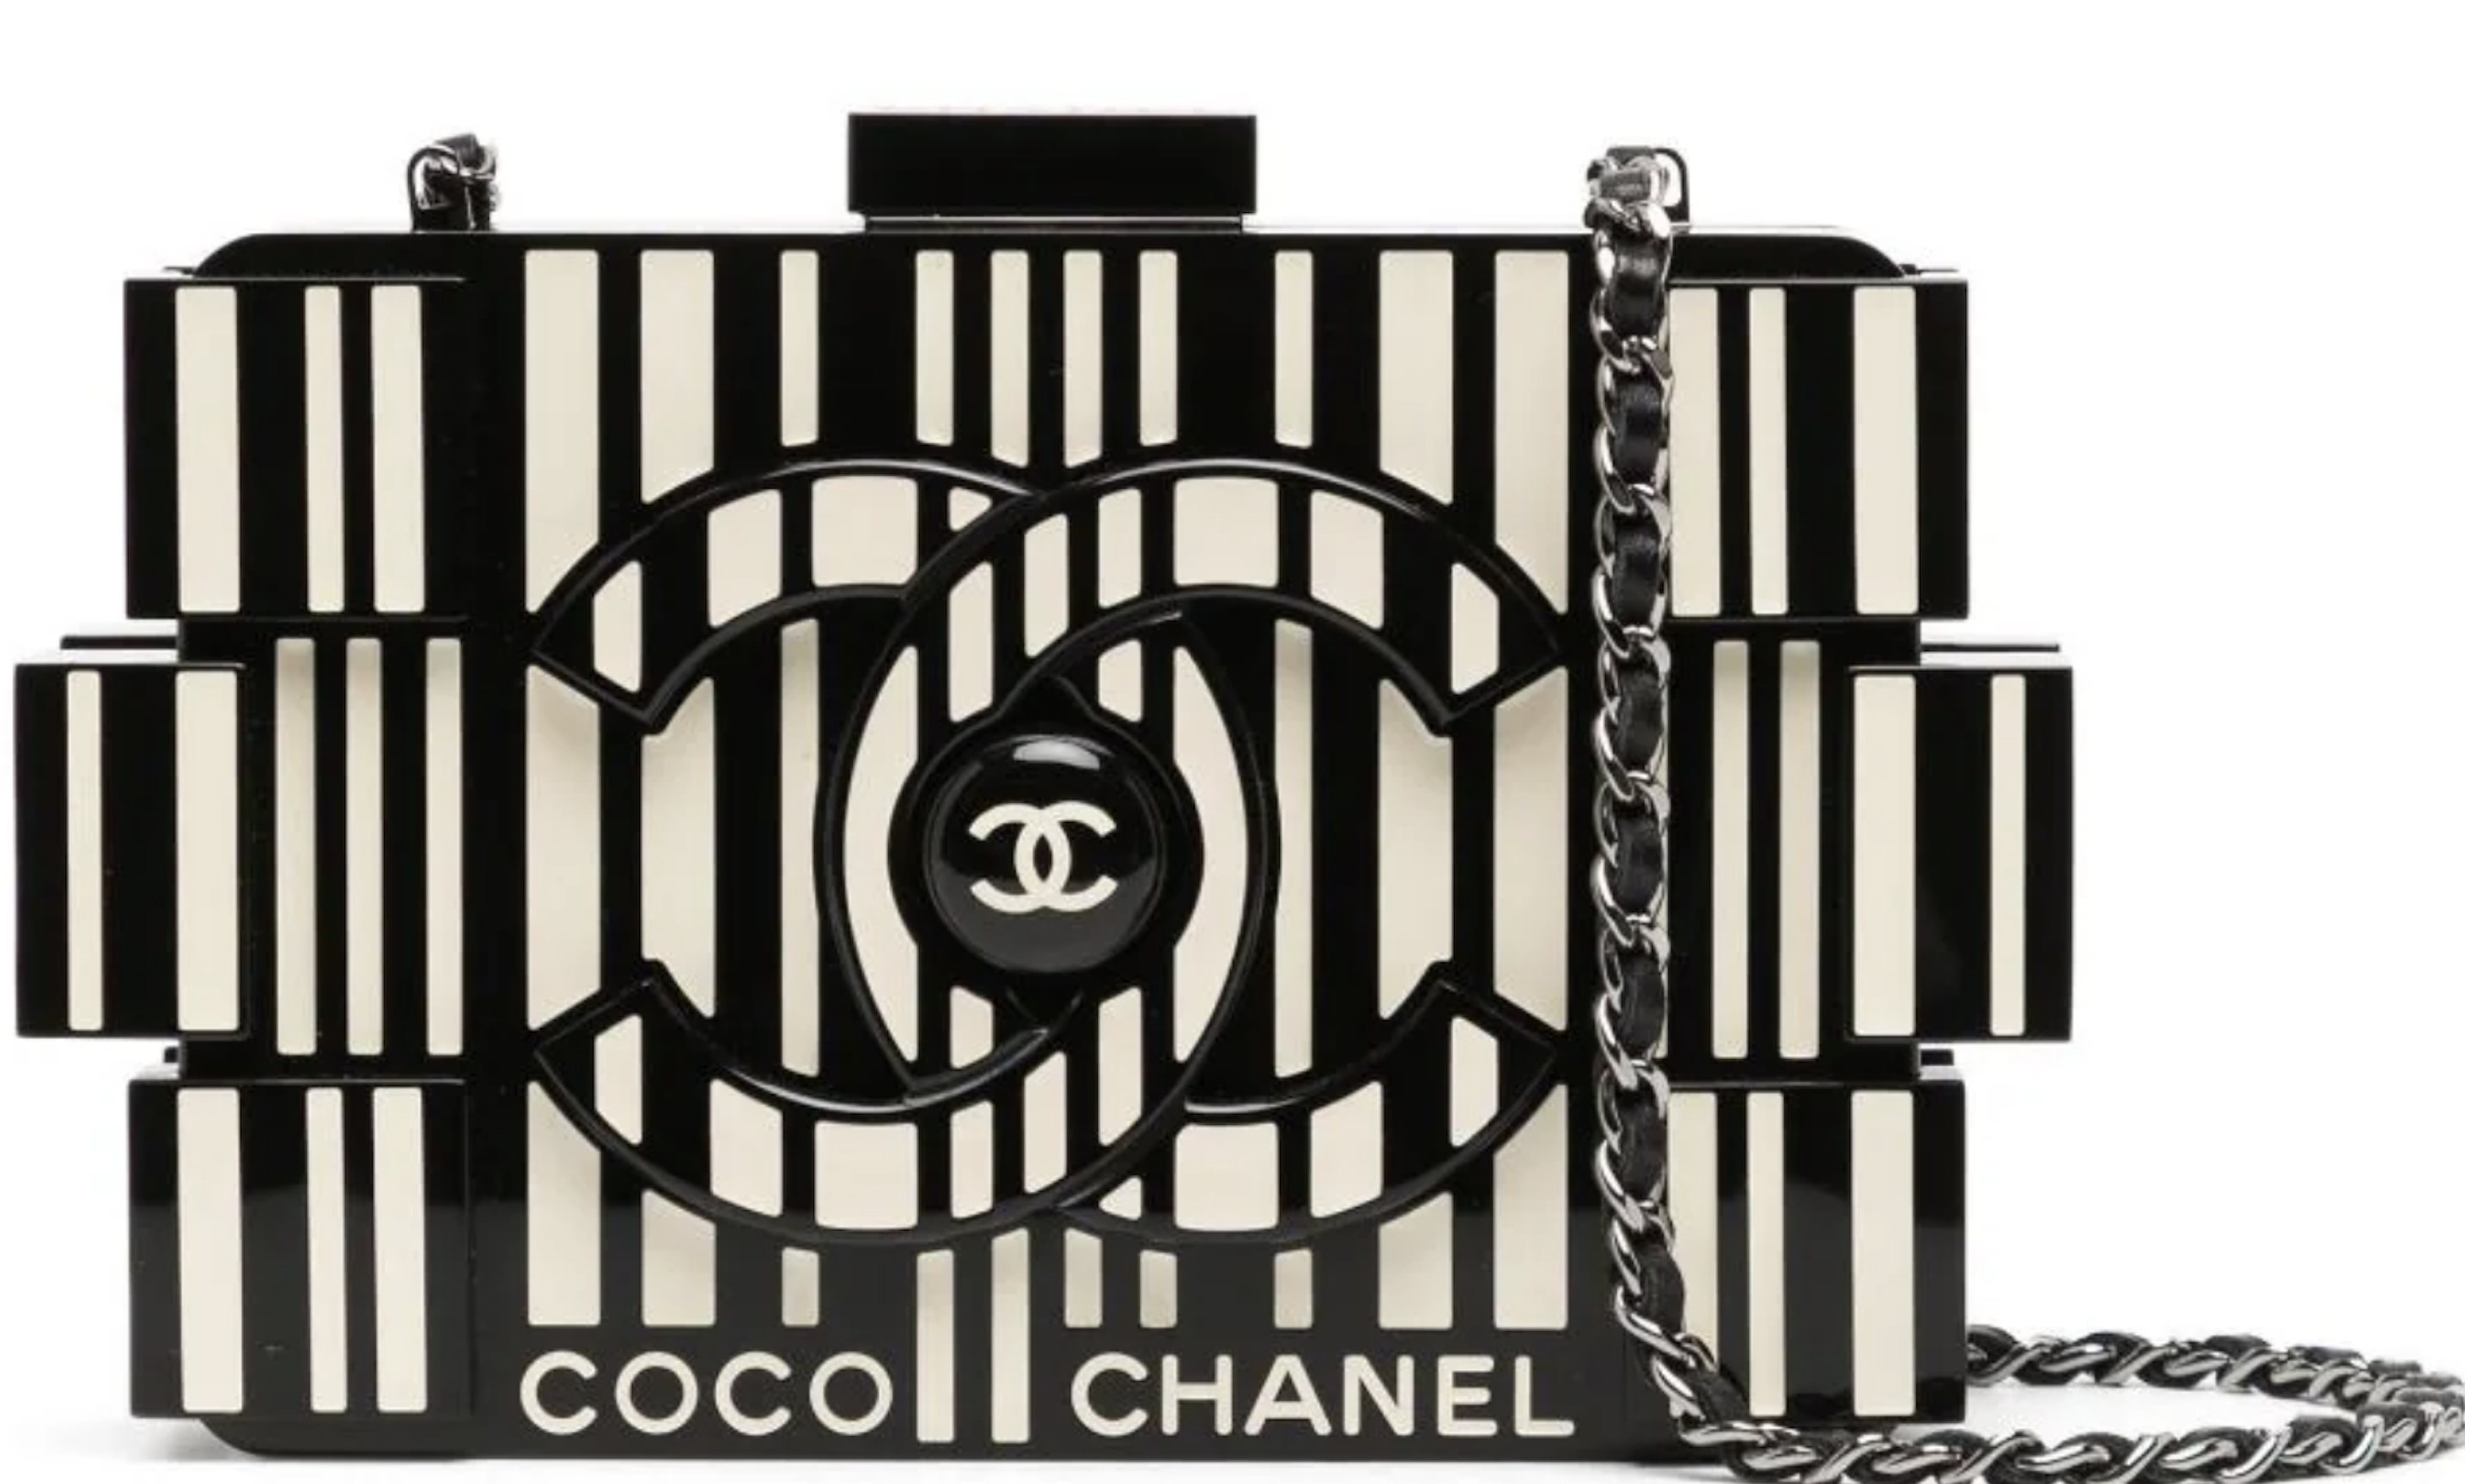 THE ULTIMATE GUIDE TO BUYING CHANEL ONLINE: HOW TO FIND AUTHENTIC PRODUCTS AND SCORE THE BEST DEALS